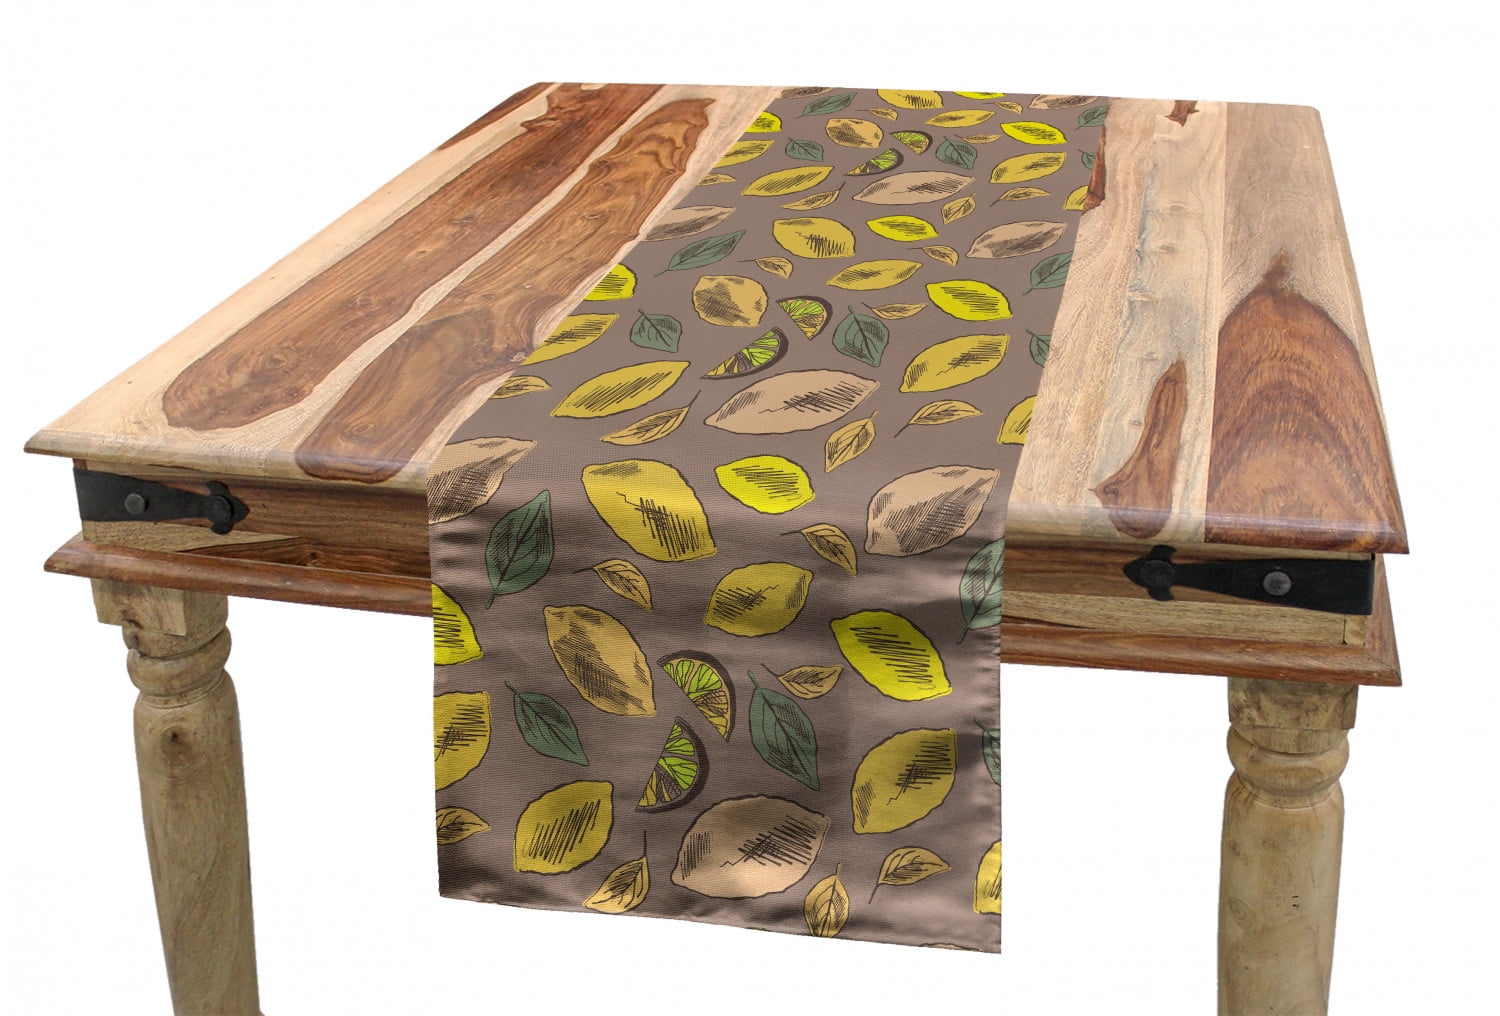 Botanical Leaves Motif in Spring Summer Tone Foliage Forest Growth 16 X 120 Ambesonne Nature Table Runner Dining Room Kitchen Rectangular Runner Turquoise and Yellow Green 